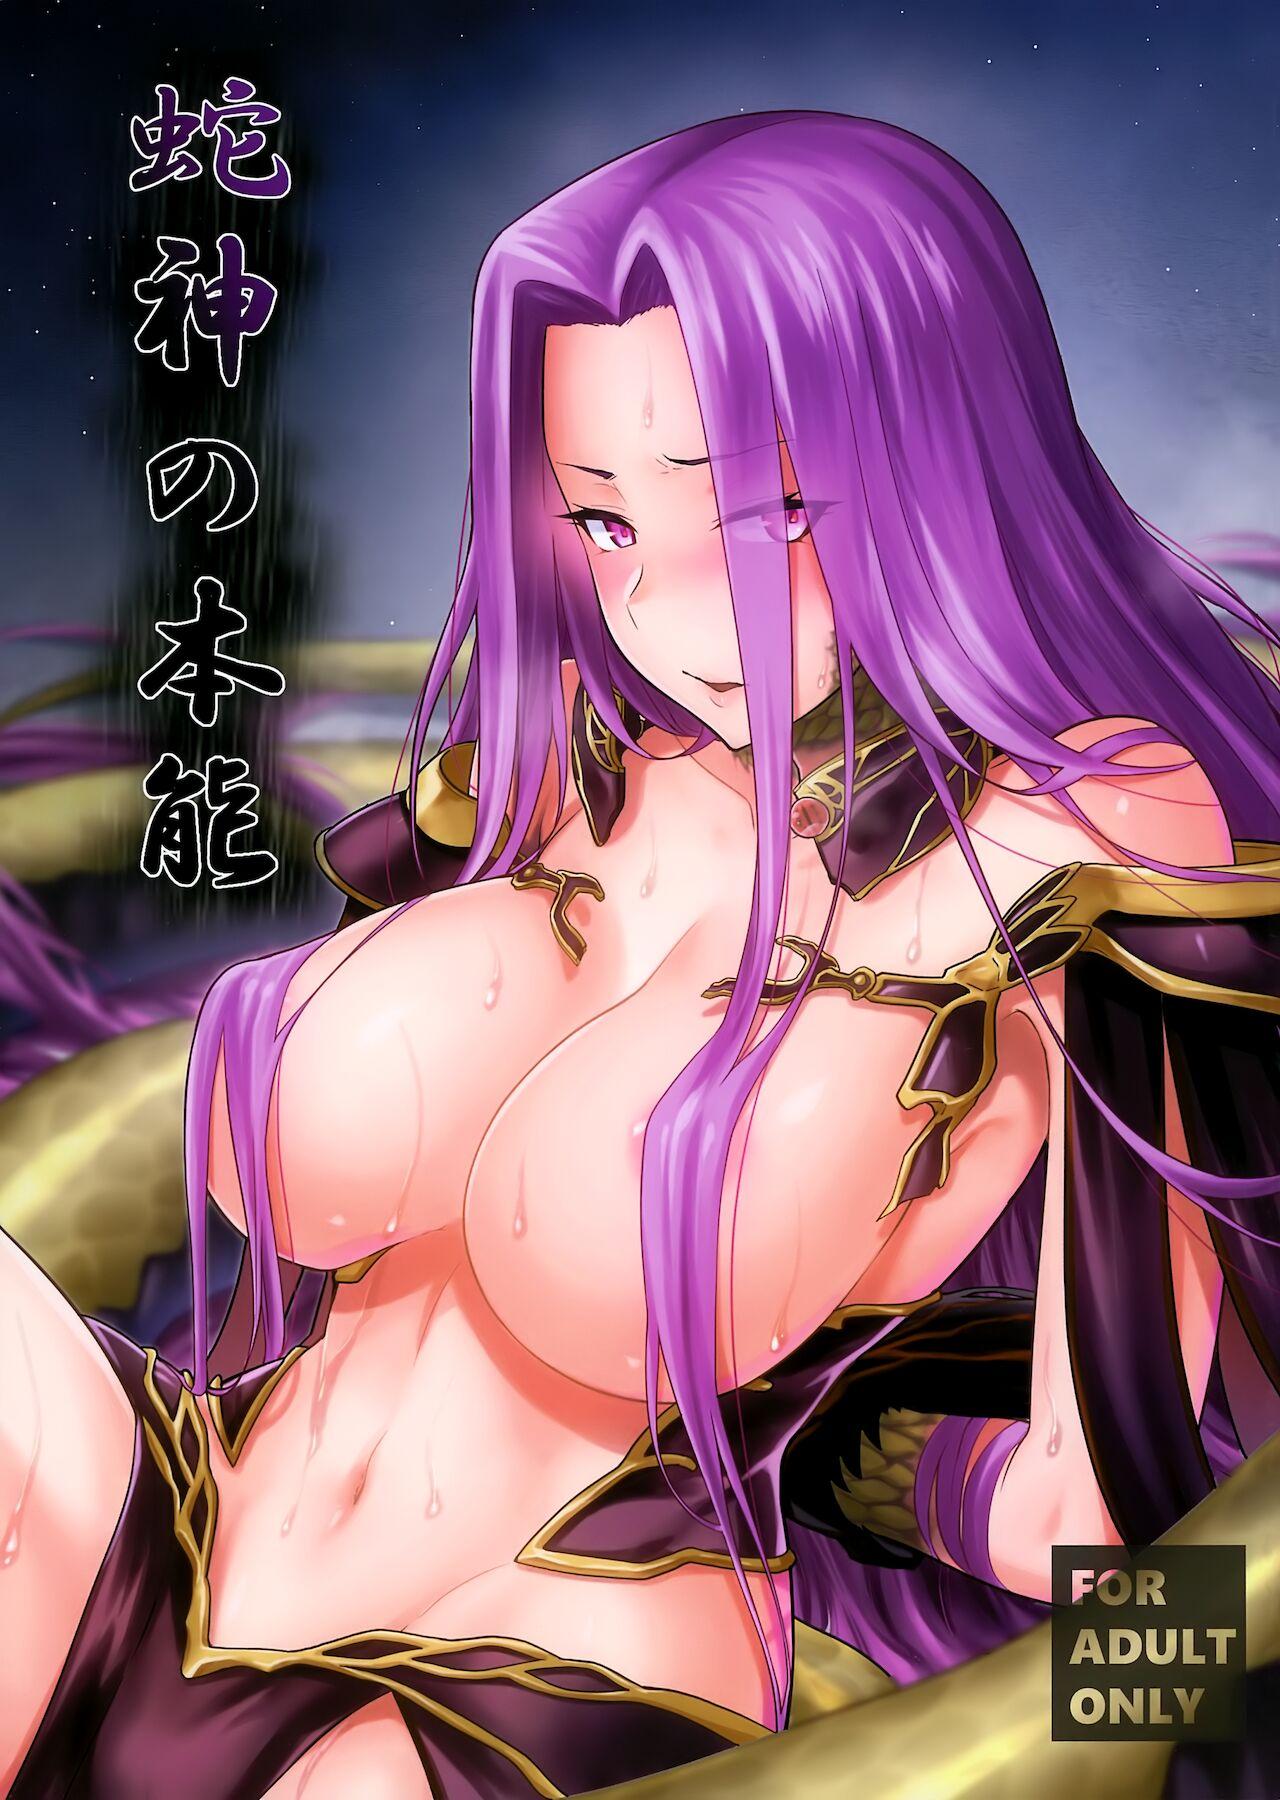 Furry Hebigami no Honnou - Fate grand order Mulher - Picture 1